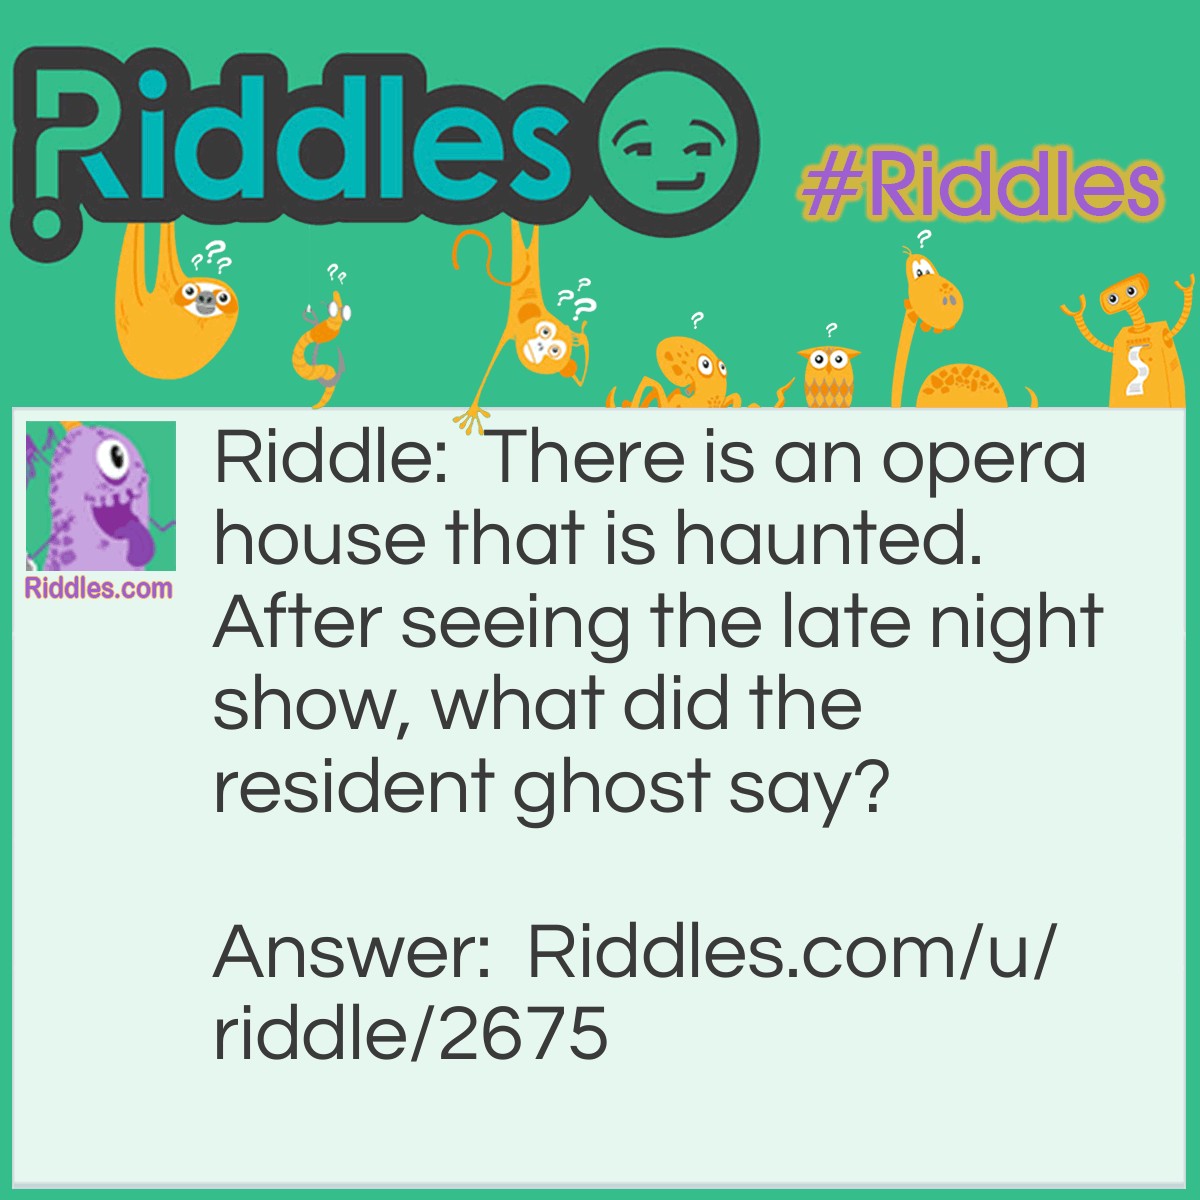 Riddle: There is an opera house that is haunted. After seeing the late night show, what did the resident ghost say? Answer: Boo!